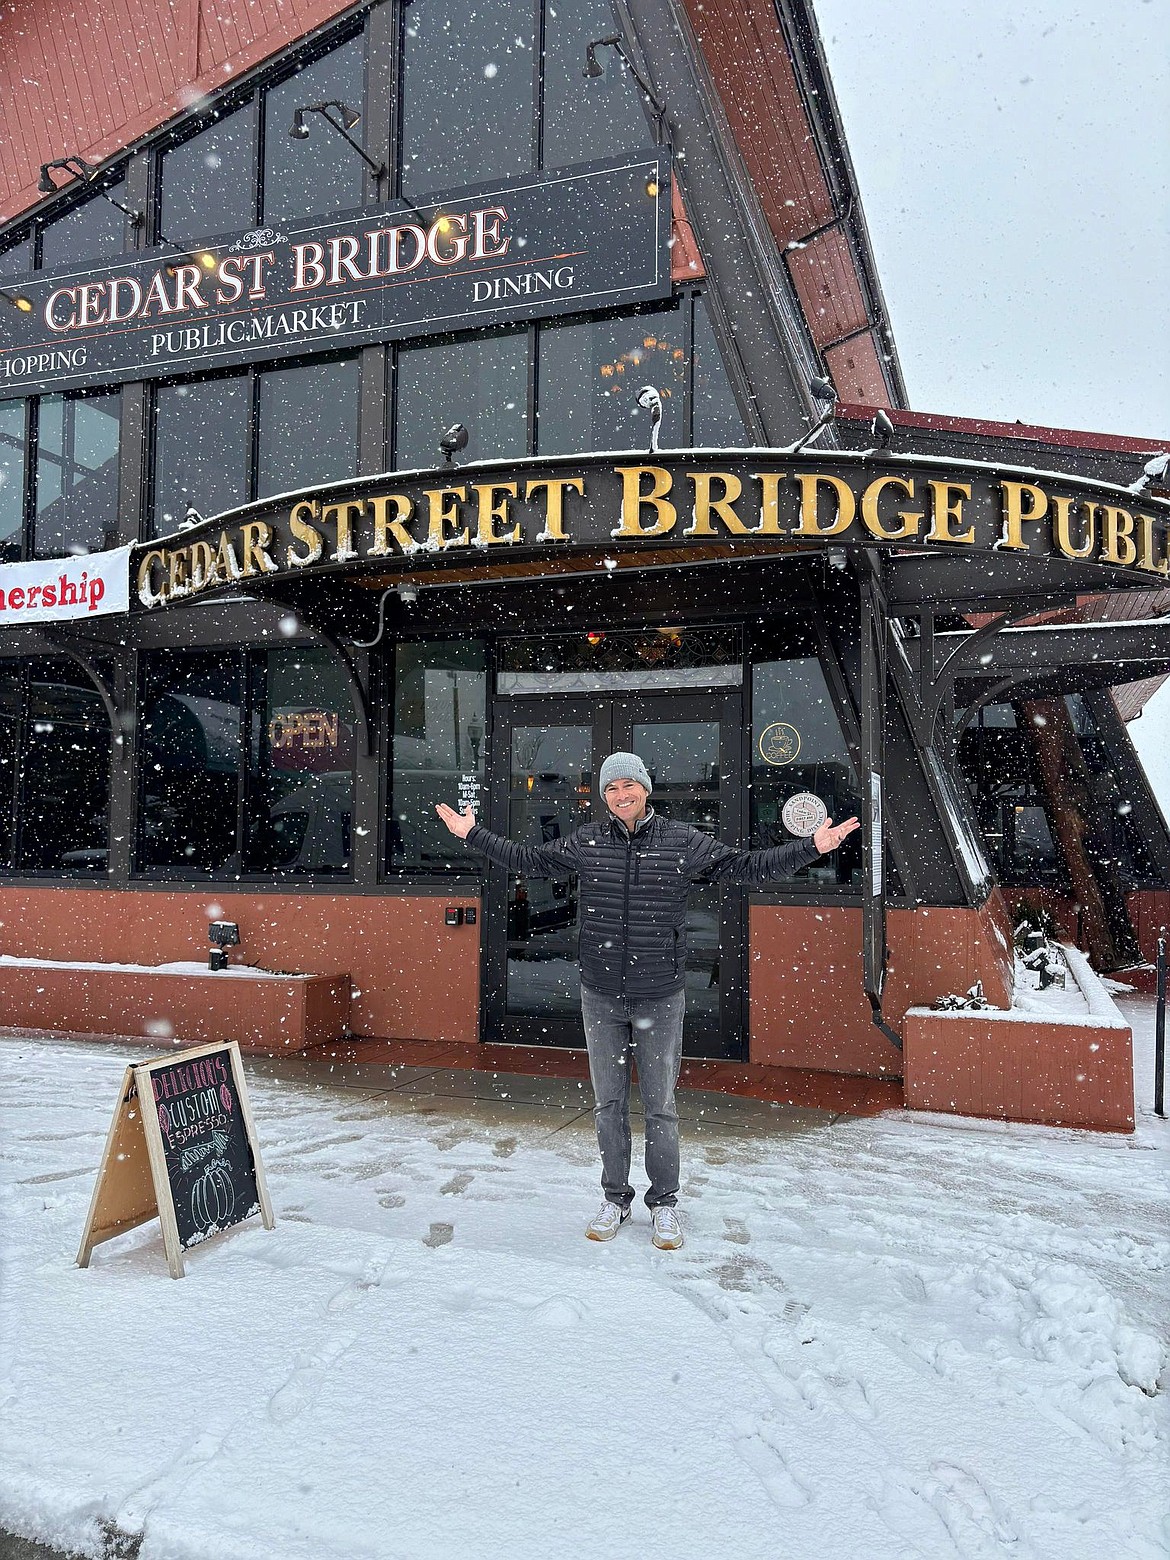 Joseph Worth, new owner of Cedar Street Bridge, has been visiting Sandpoint since 2020, all the while developing a passion for the bridge and the community.